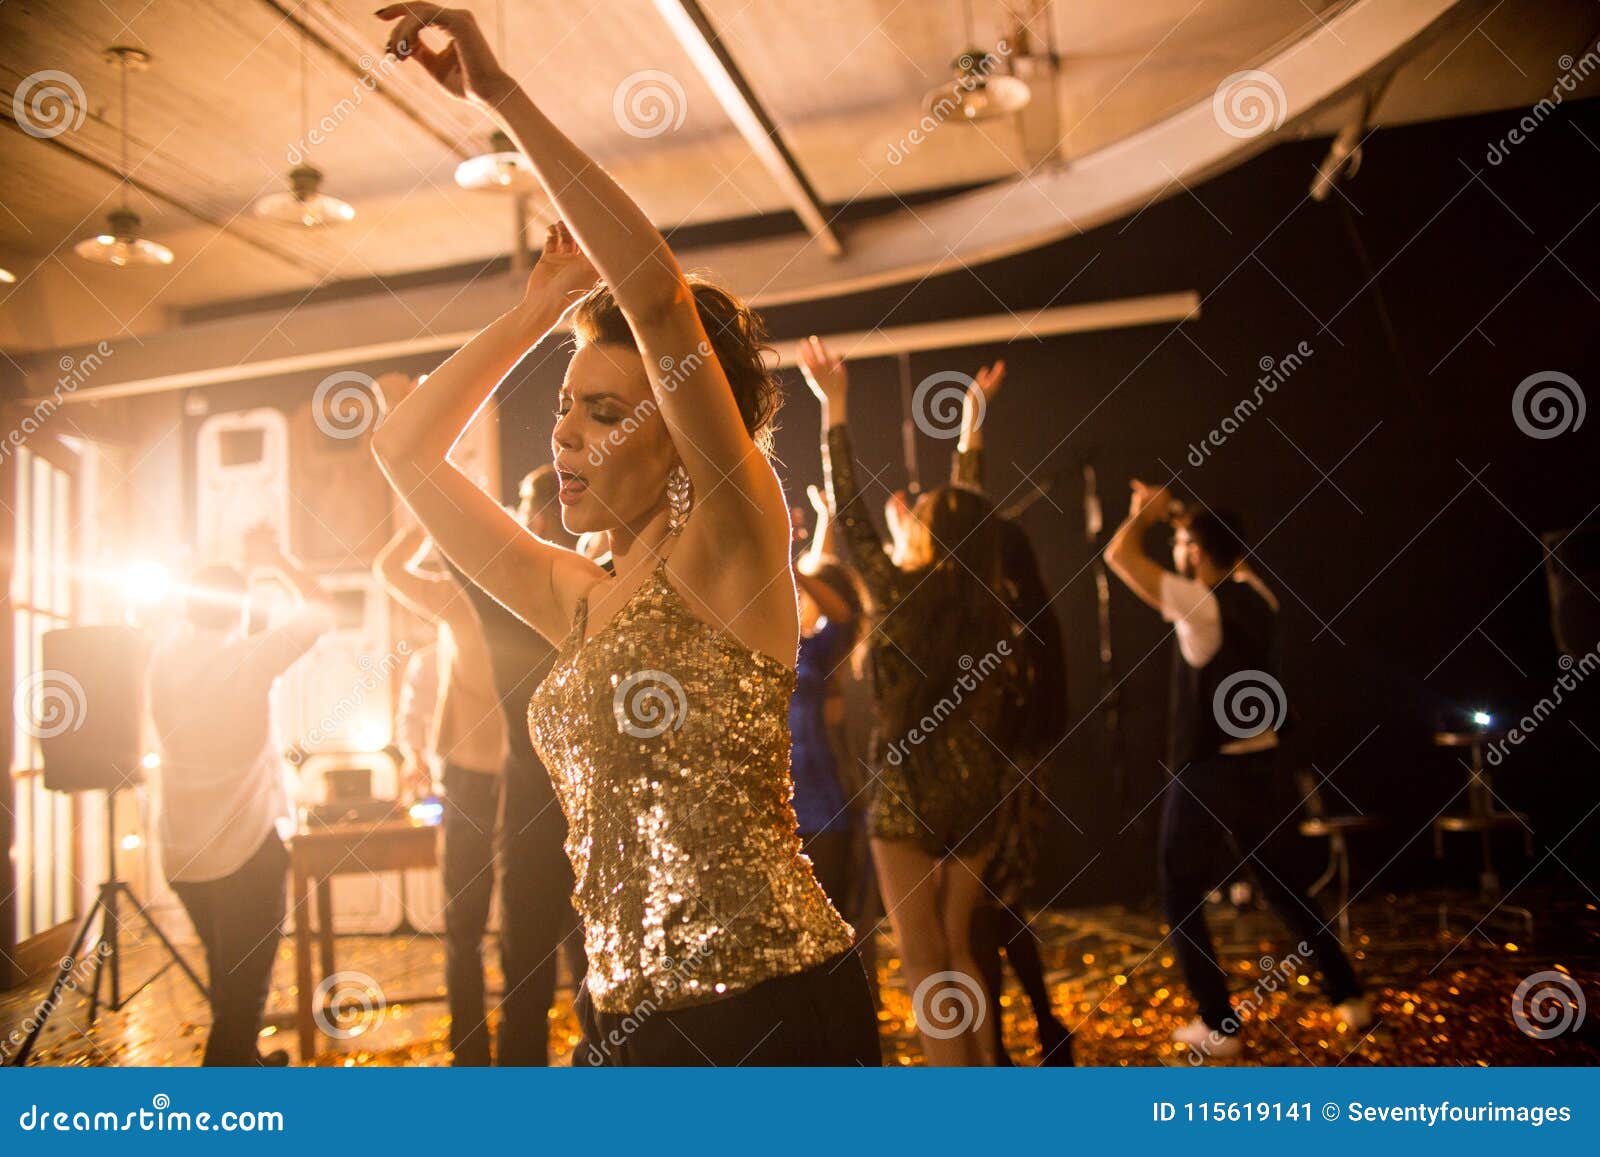 Young Woman Enjoying Dancing in Club Stock Image - Image of clubber ...